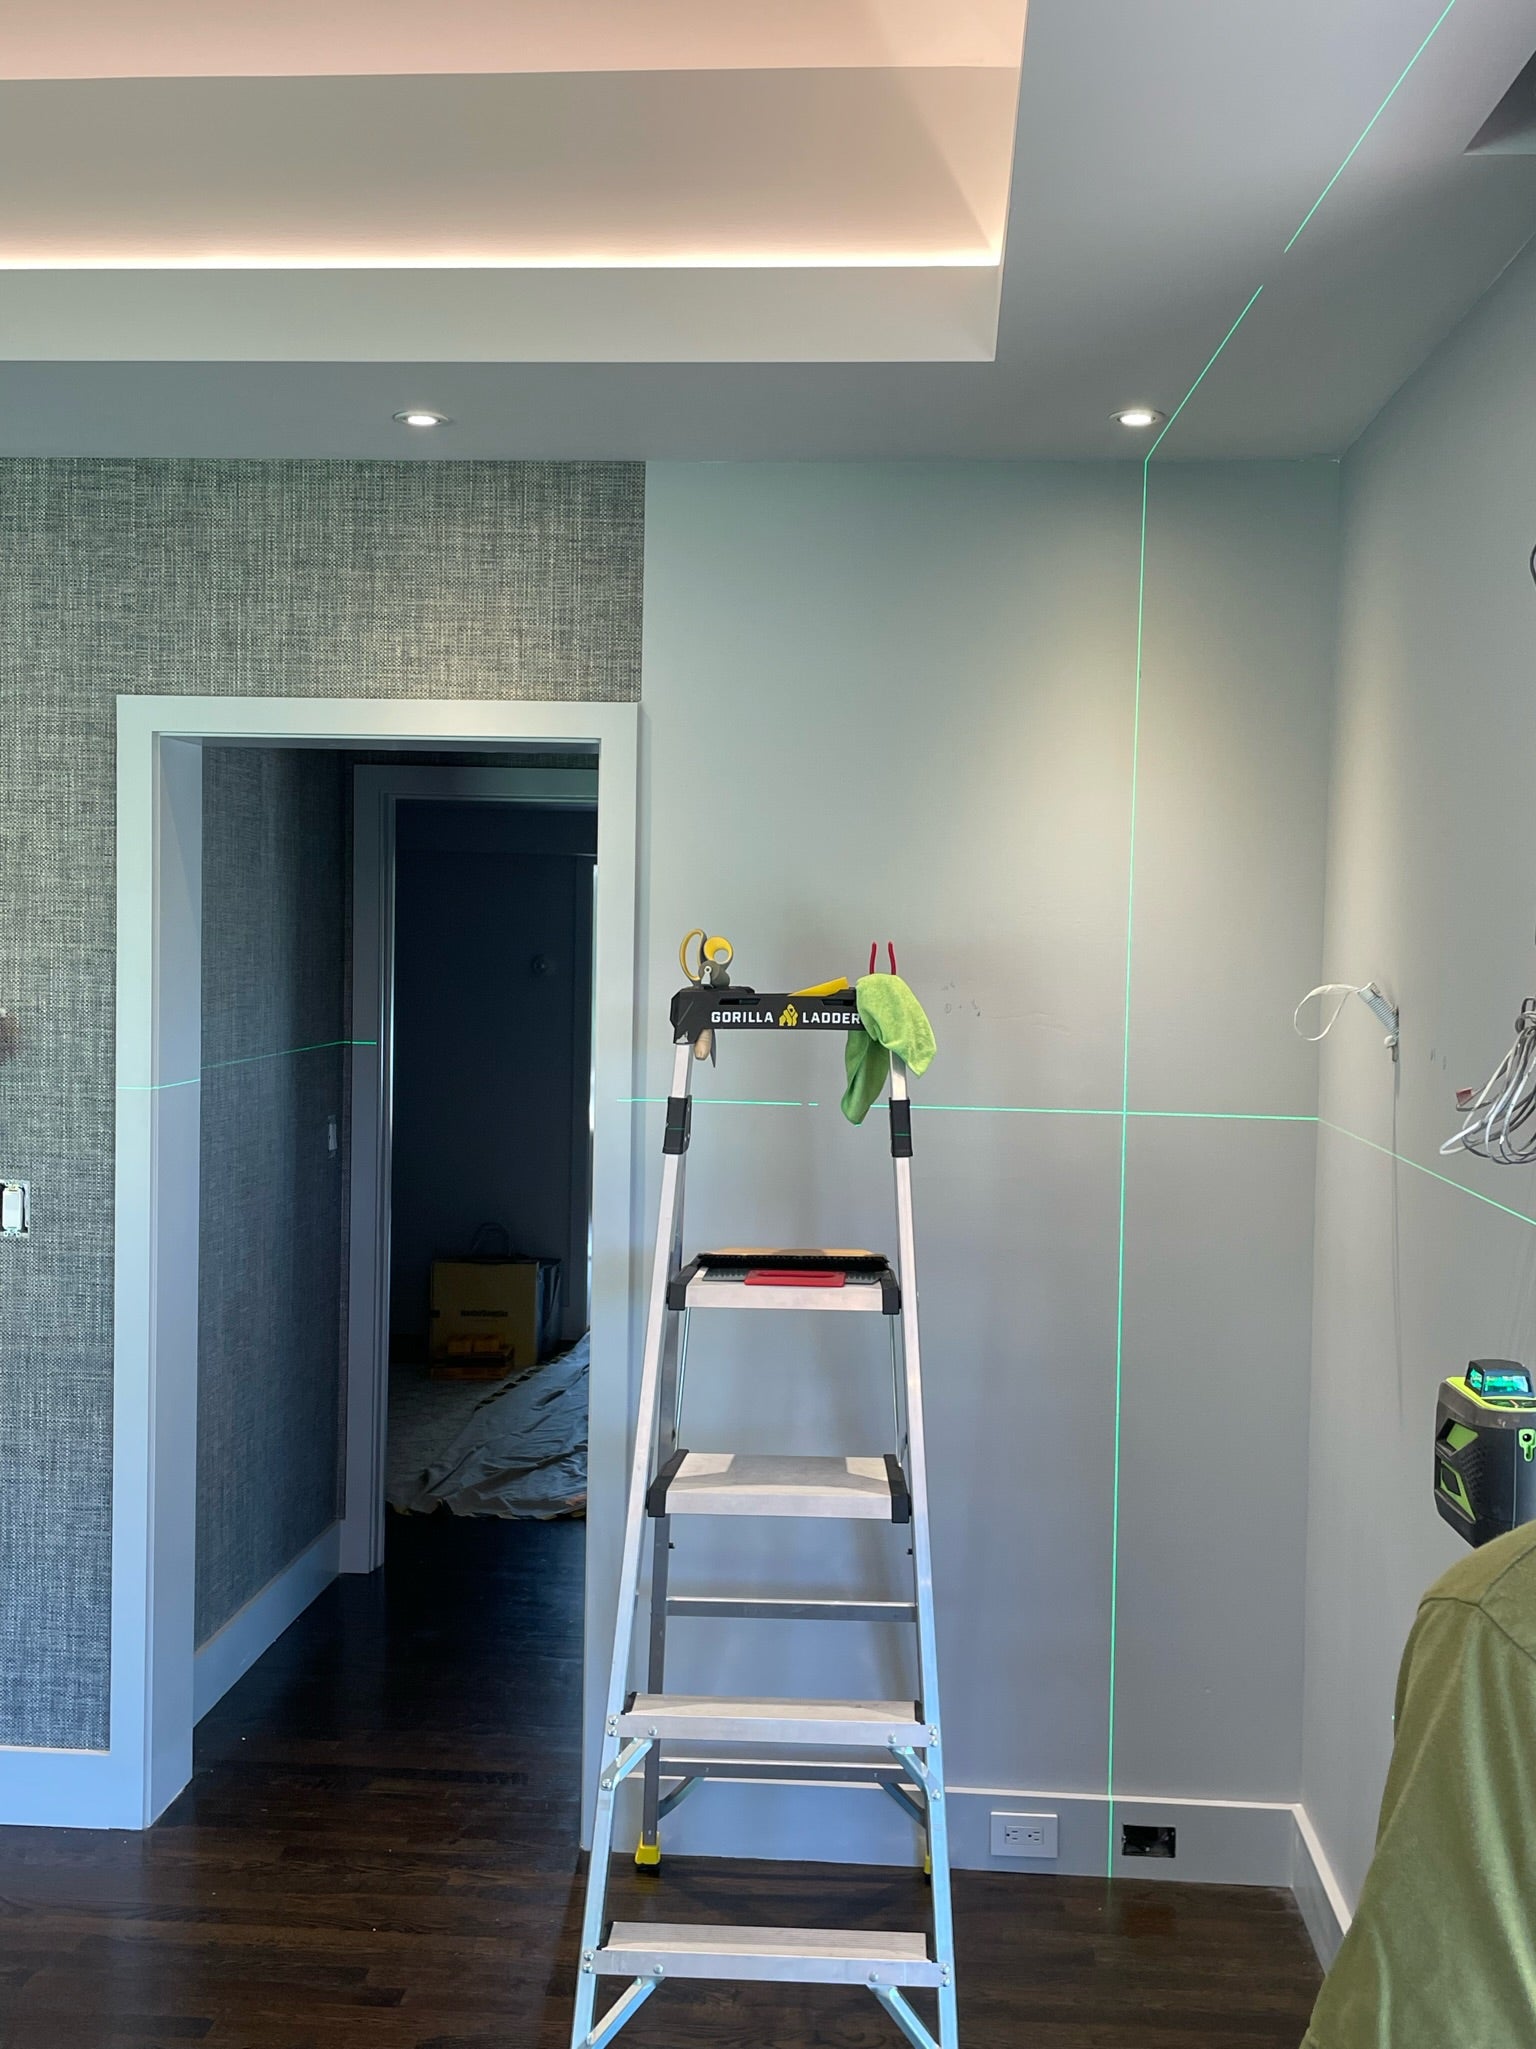 Inside a room facing a wall with green laser lines for placing wallpaper and a ladder